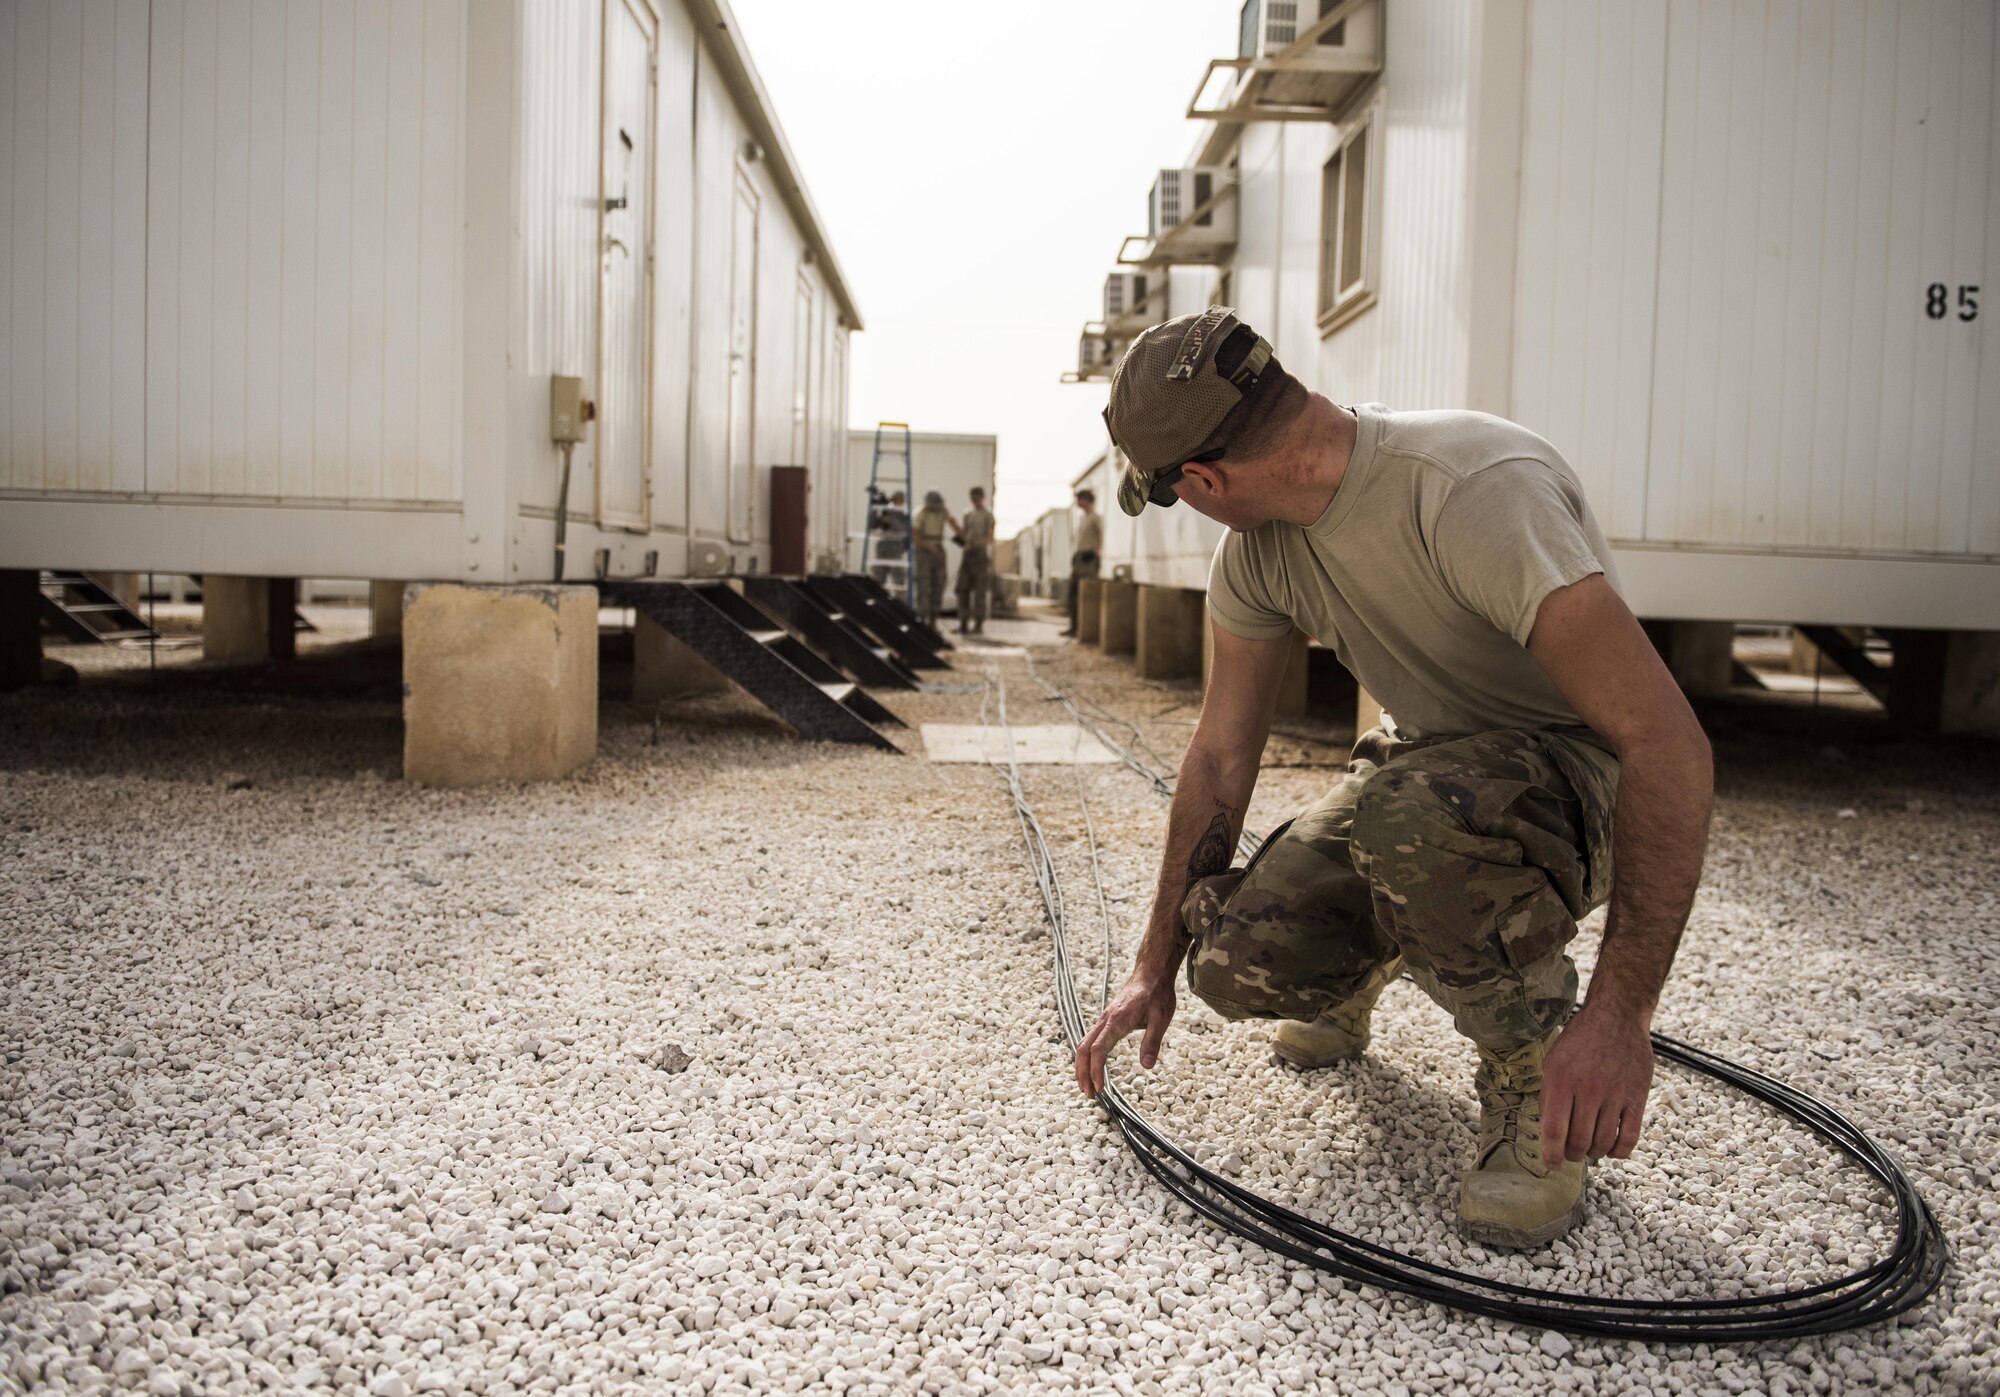 SrA Jacob Ferreira, assigned to the 332nd Expeditionary Communications Squadron, positions copper wire for installation as part of a base-wide wireless internet improvement project Nov. 13, 2017 in Southwest Asia. The 332nd ECS has made rapid improvements to base internet connectivity in recent months, providing deployed service members with a more reliable, flexible connection to home. (U.S. Air Force by Senior Airman Joshua Kleinholz)